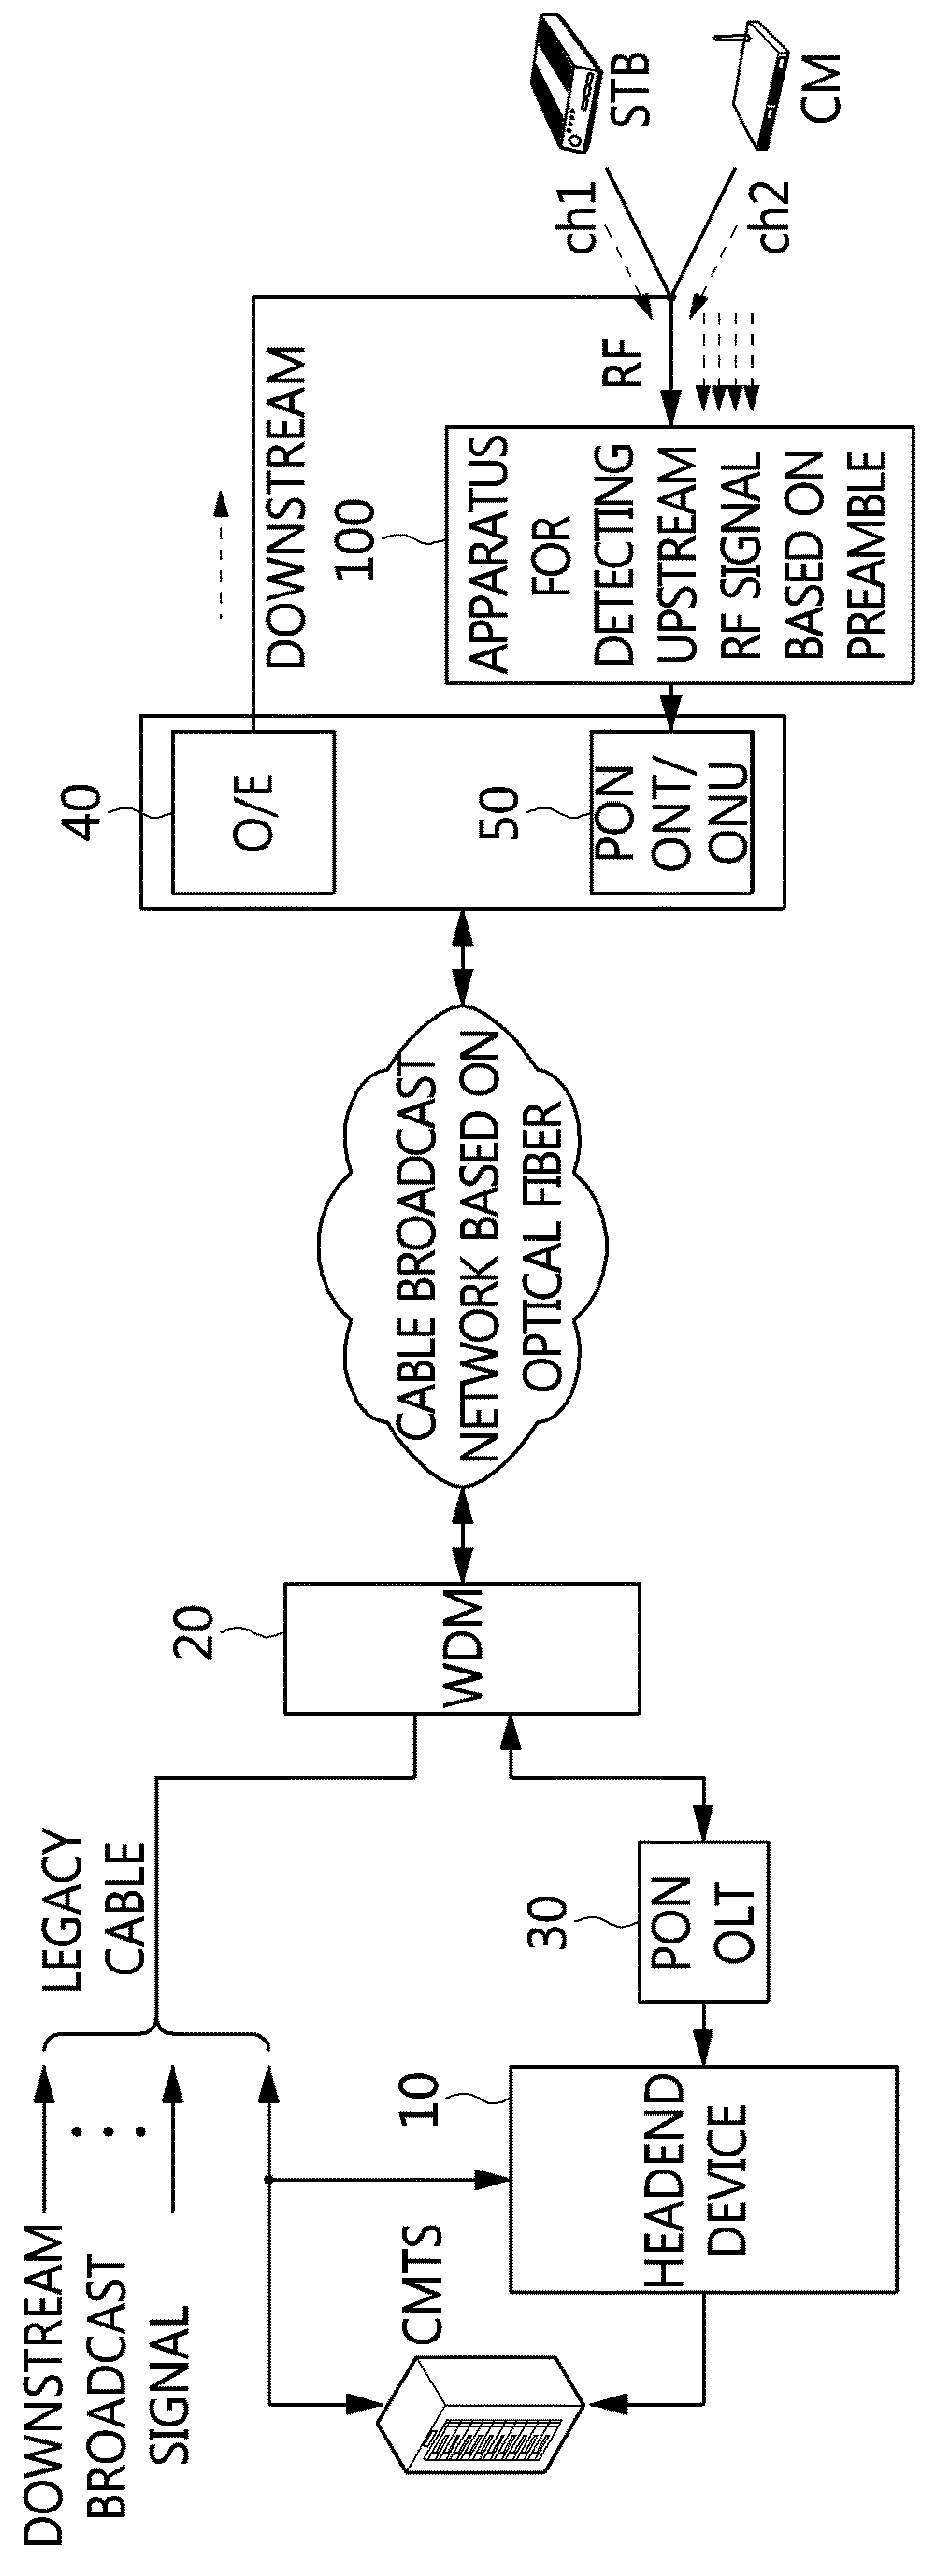 Apparatus and method for detecting upstream RF signals based on preamble, and apparatus for cable broadcasting using the same